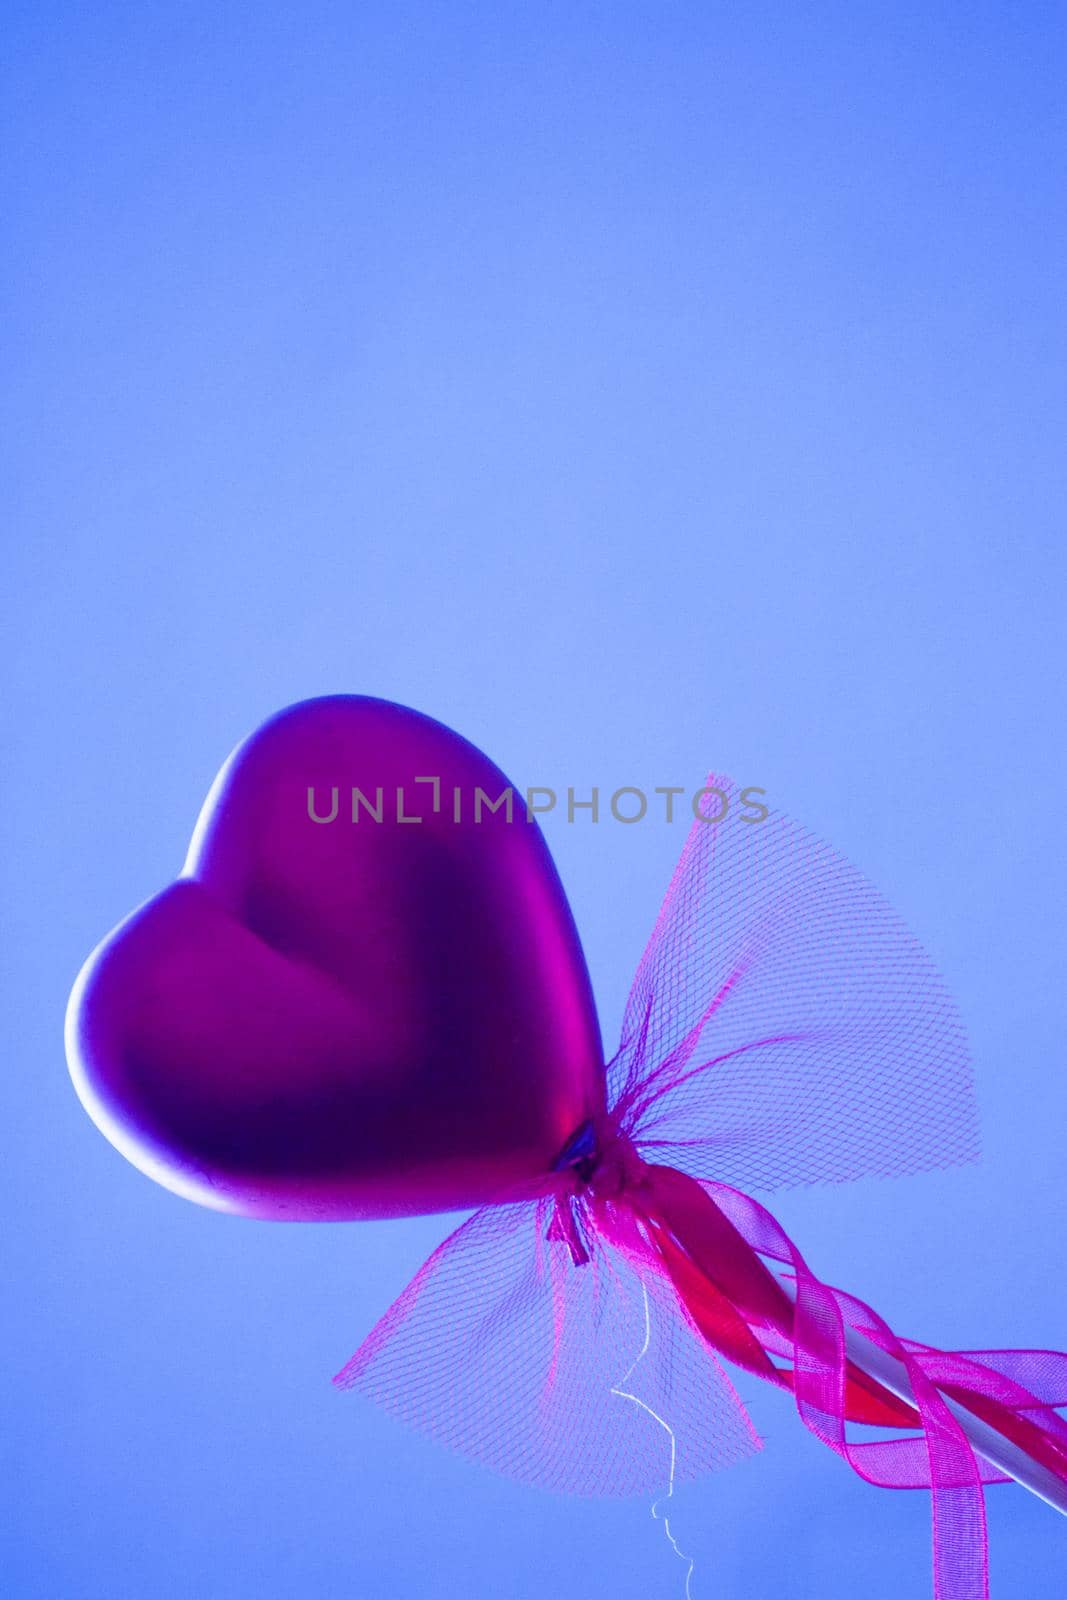 Red heart attached to a stick with a bow hanging by GemaIbarra